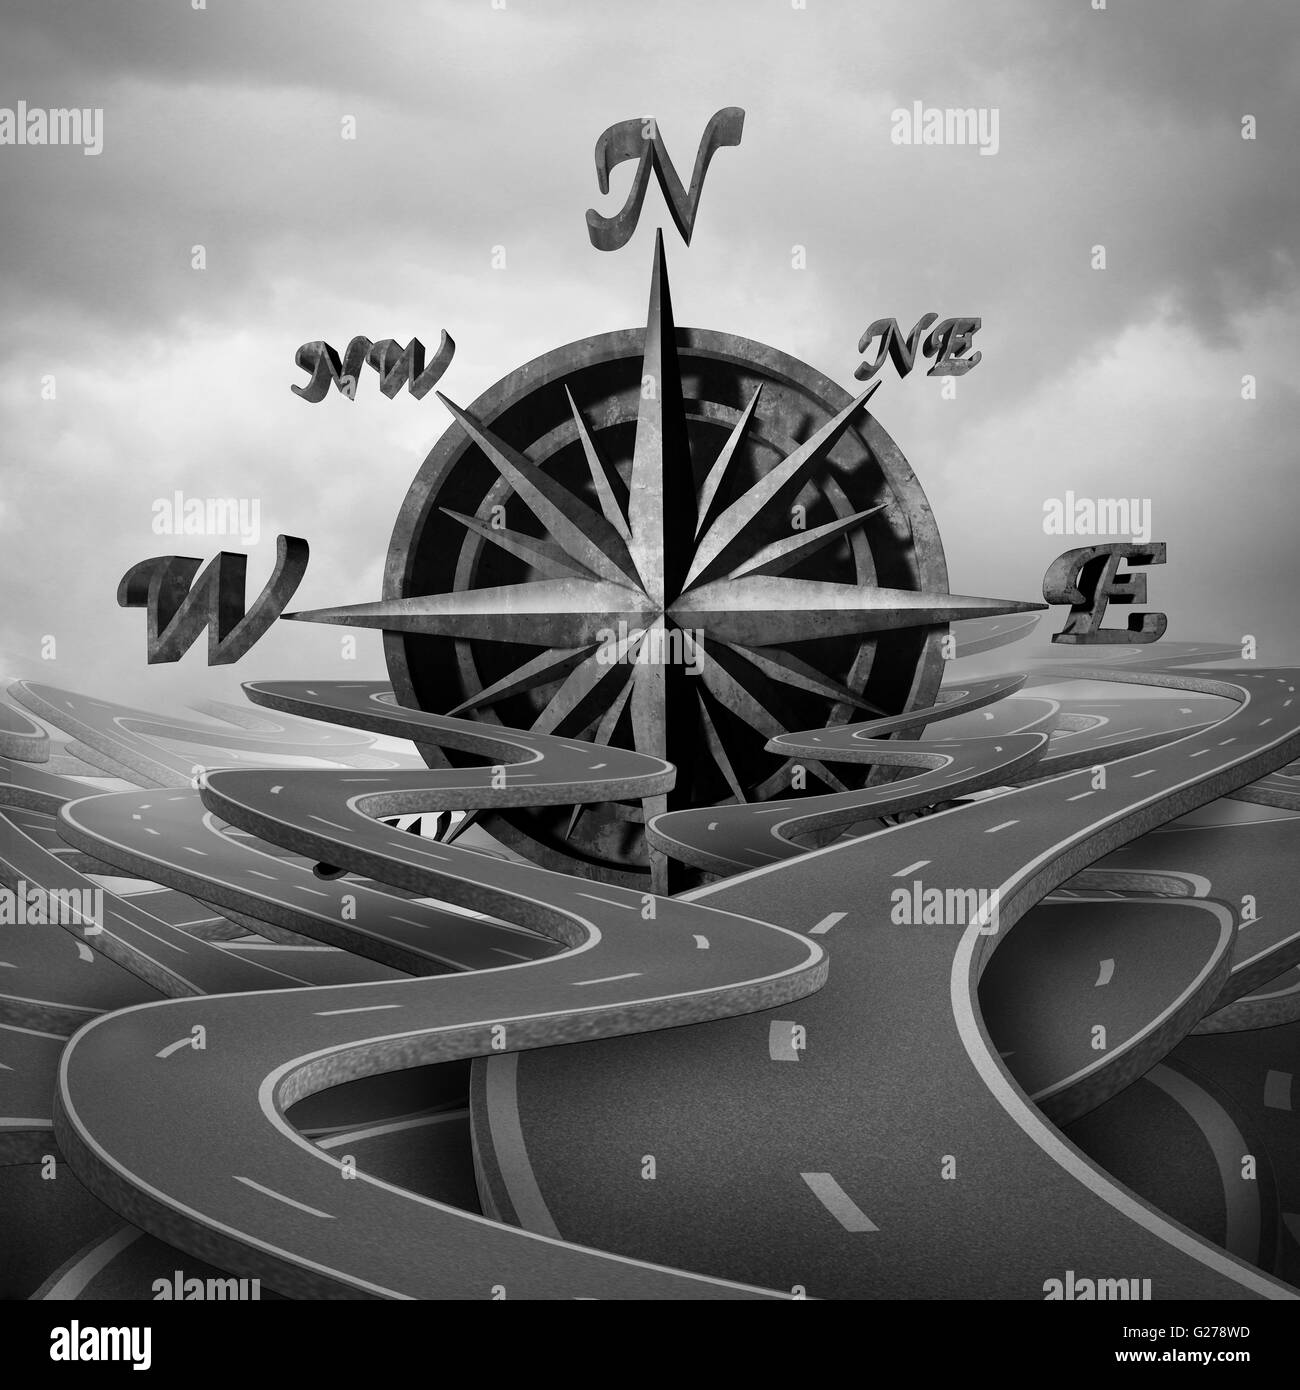 Concept of navigation as a business compass symbol or moral compass icon in a group of roads and pathway routes as a journey metaphor for destination vision as a 3D illustration. Stock Photo